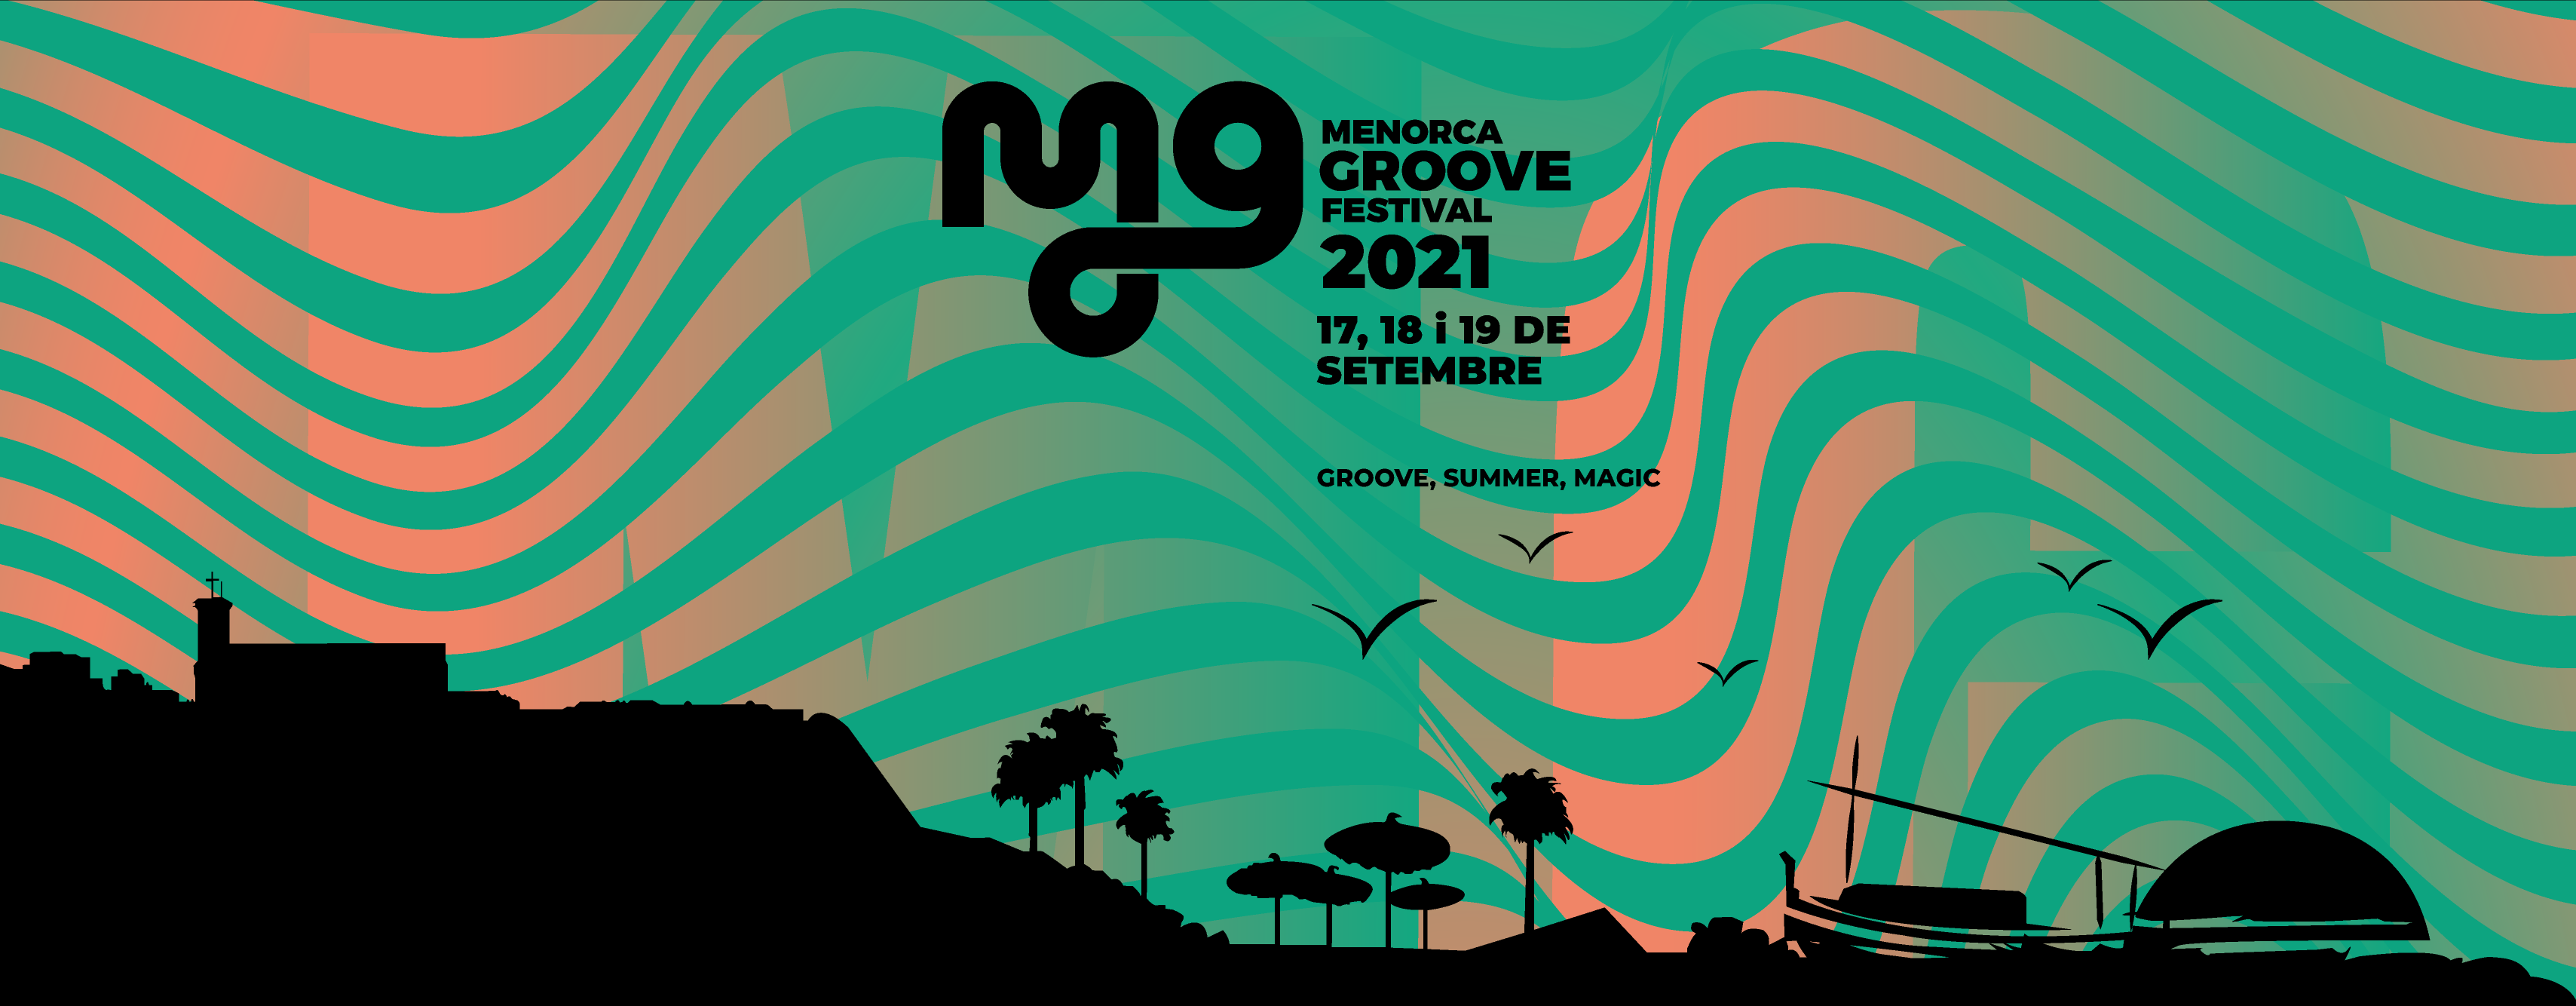 Menorca Groove Festival 2021. Tickets, lineup, bands for Menorca Groove  Festival 2021 | Wegow Spain